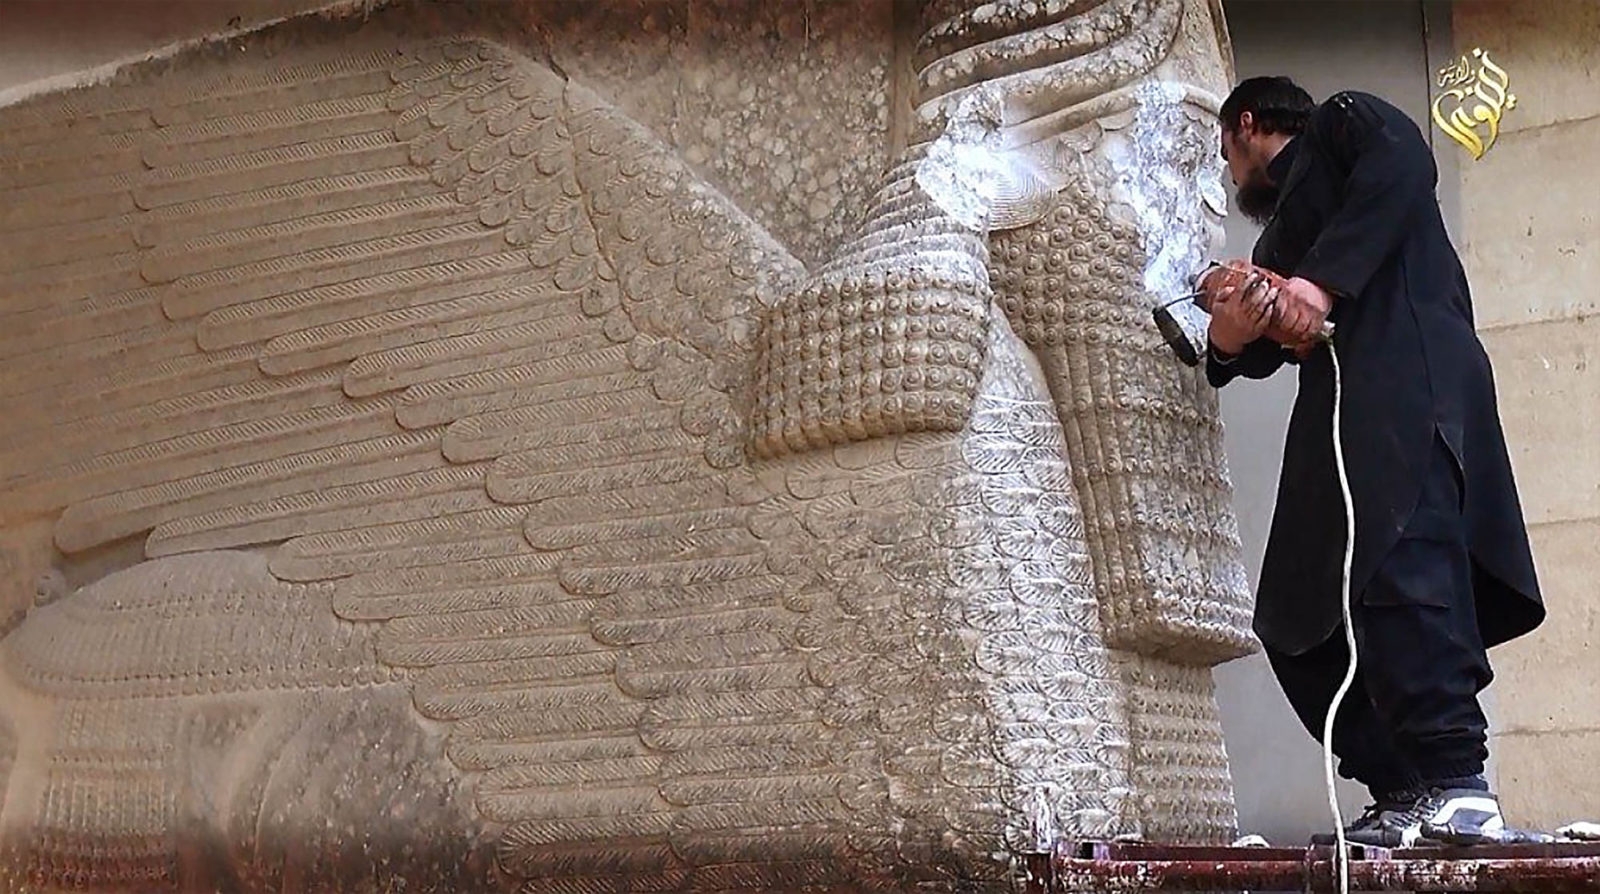 STILL FROM A 2015 ISStill from a 2015 ISIS propaganda video showing a member of the iconoclastic militant group wielding a jackhammer to chisel off the face of a nine-ton lamassu, a human-headed winged bull monument built in the 8th century B.C. to guard the Nergal Gate of the Assyrian city-state of Nineveh.